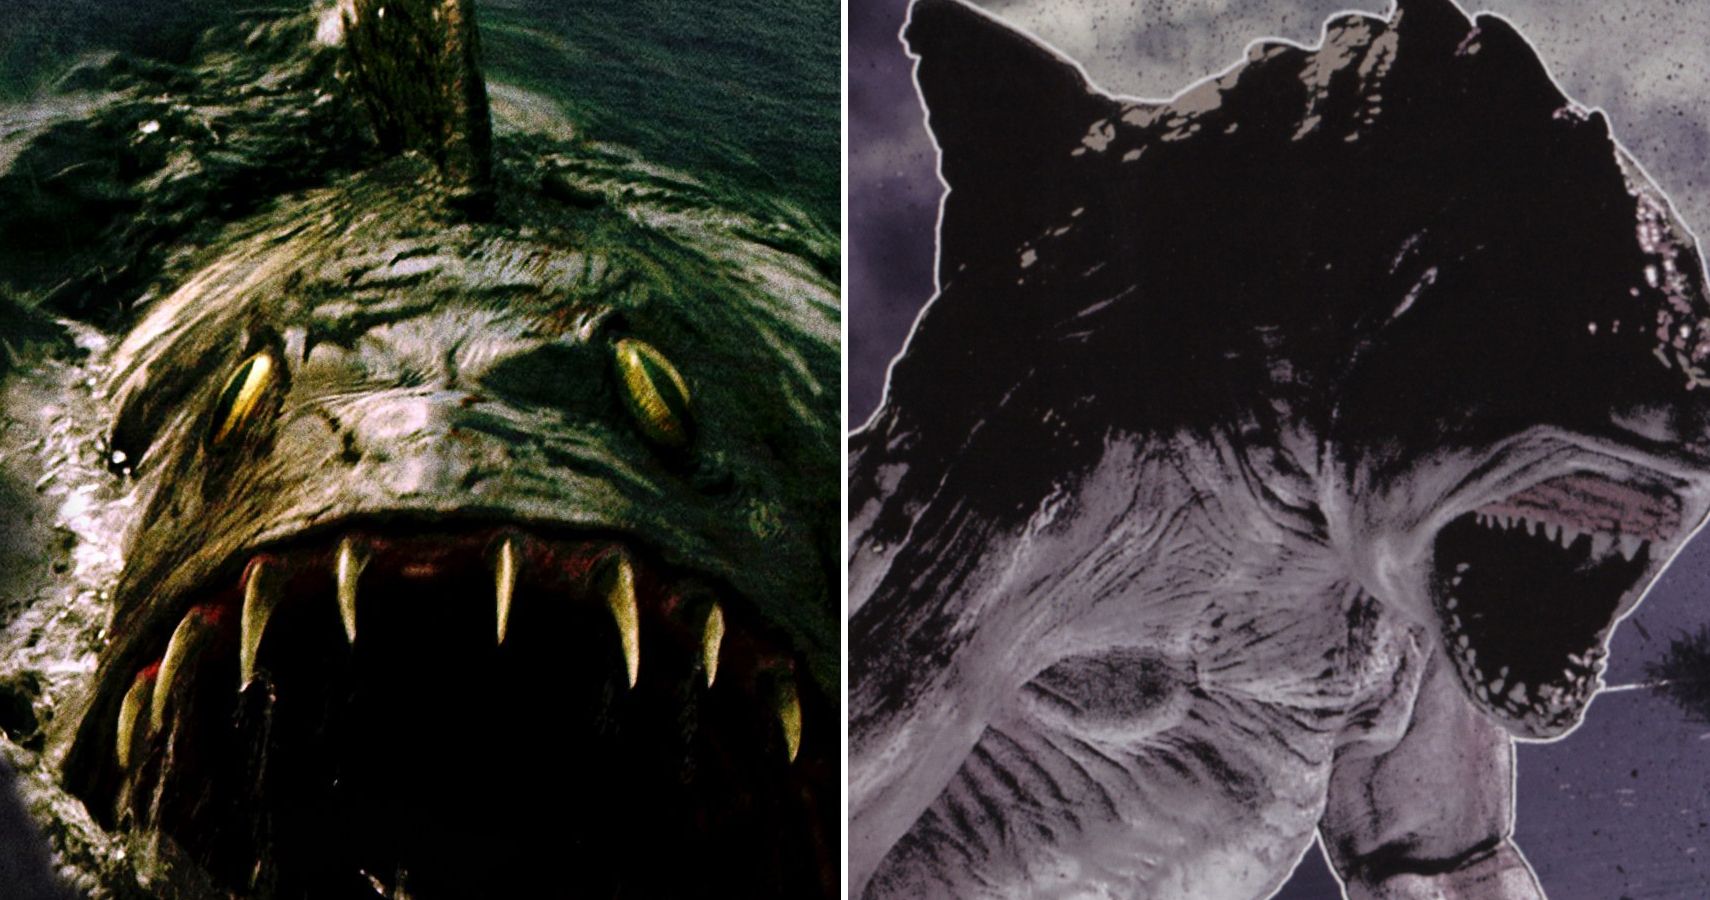 Underwater: The 10 Most Underrated Aquatic Horror Movies, Ranked